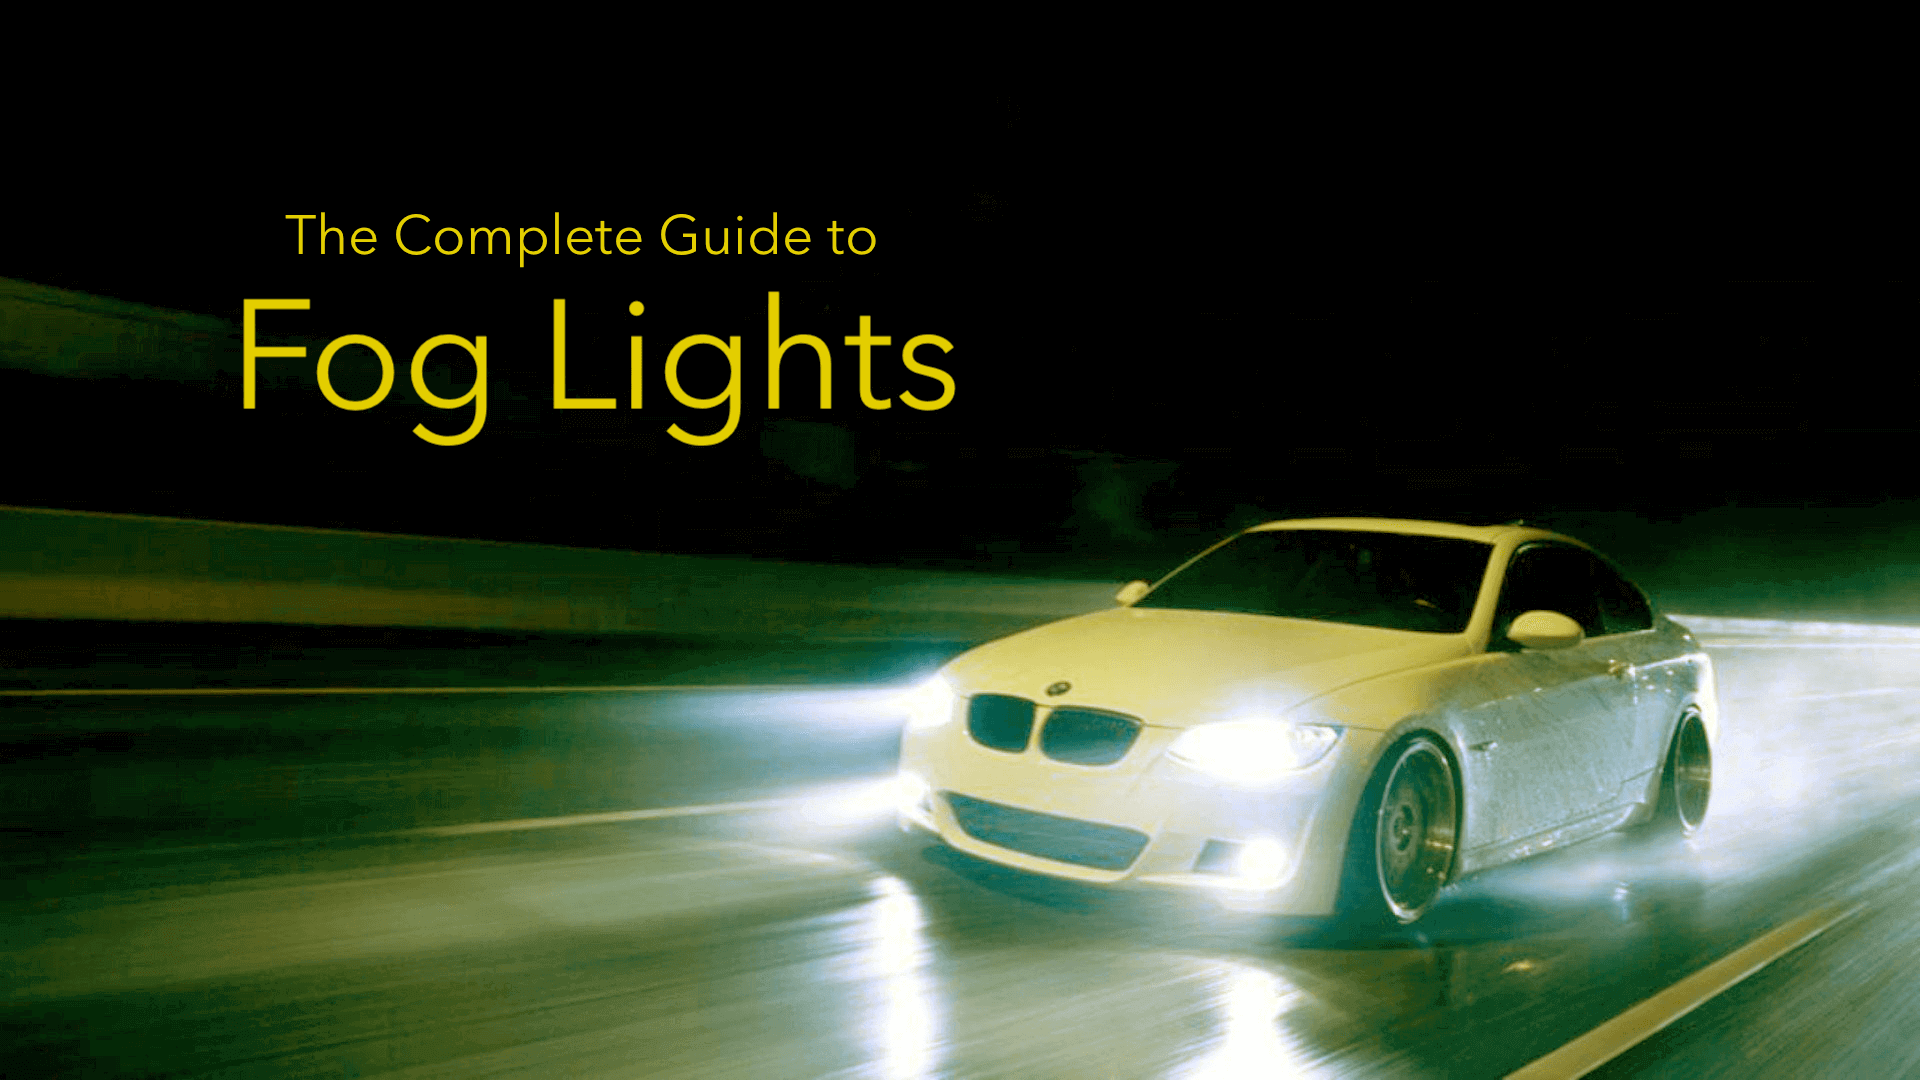 XenonPro - A Complete Guide to Fog Lights